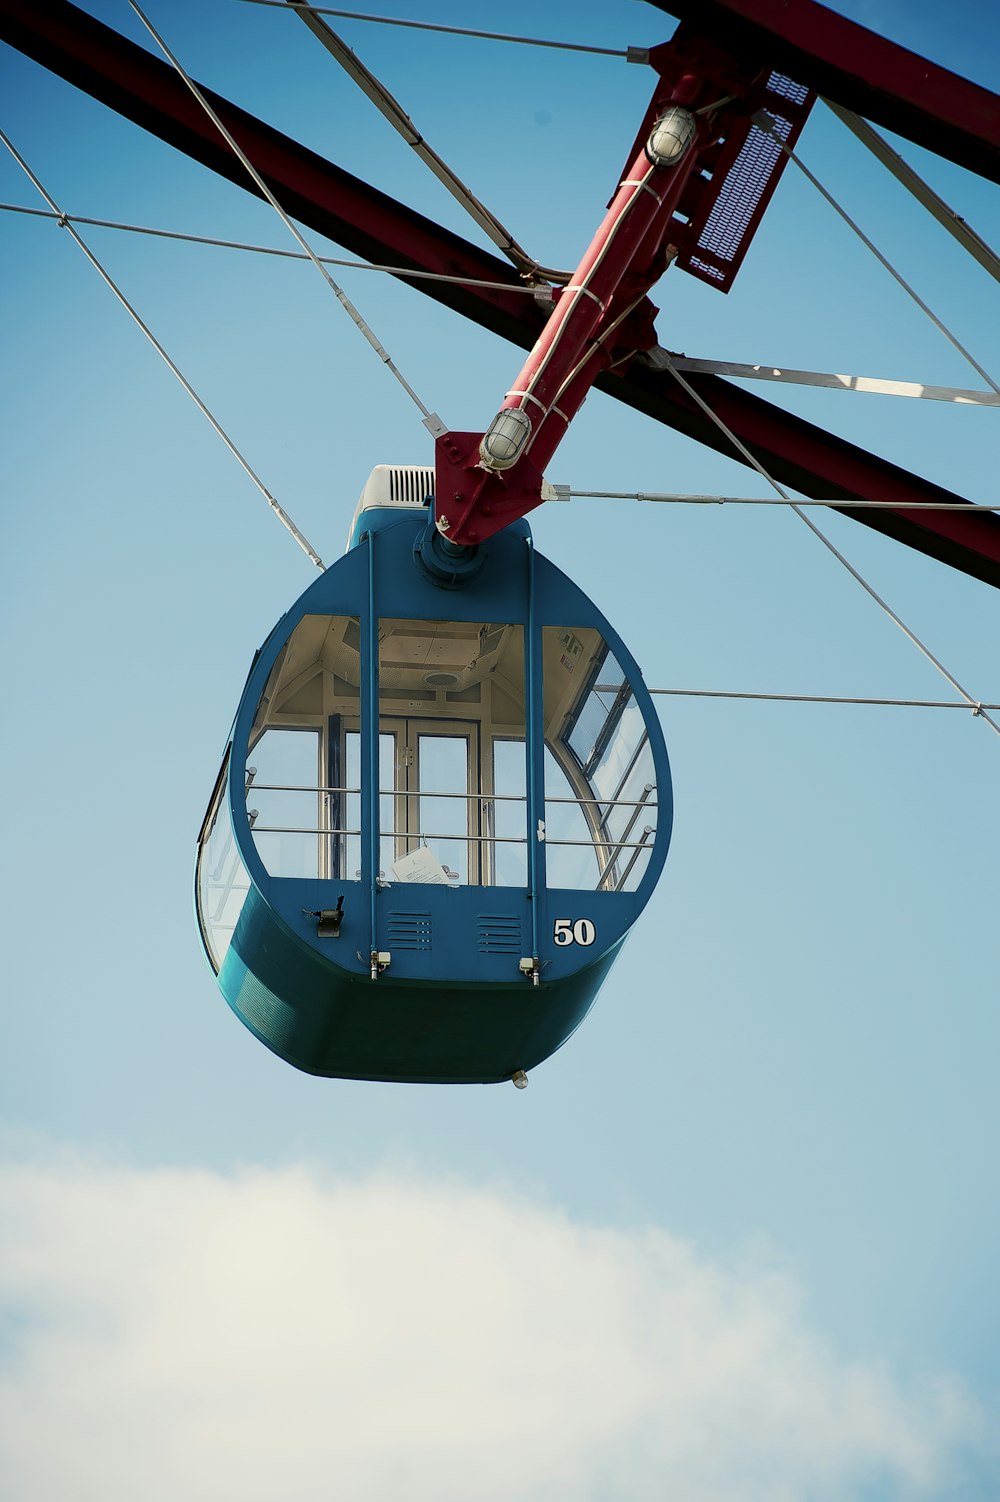 blue and red cable car under blue sky during daytime